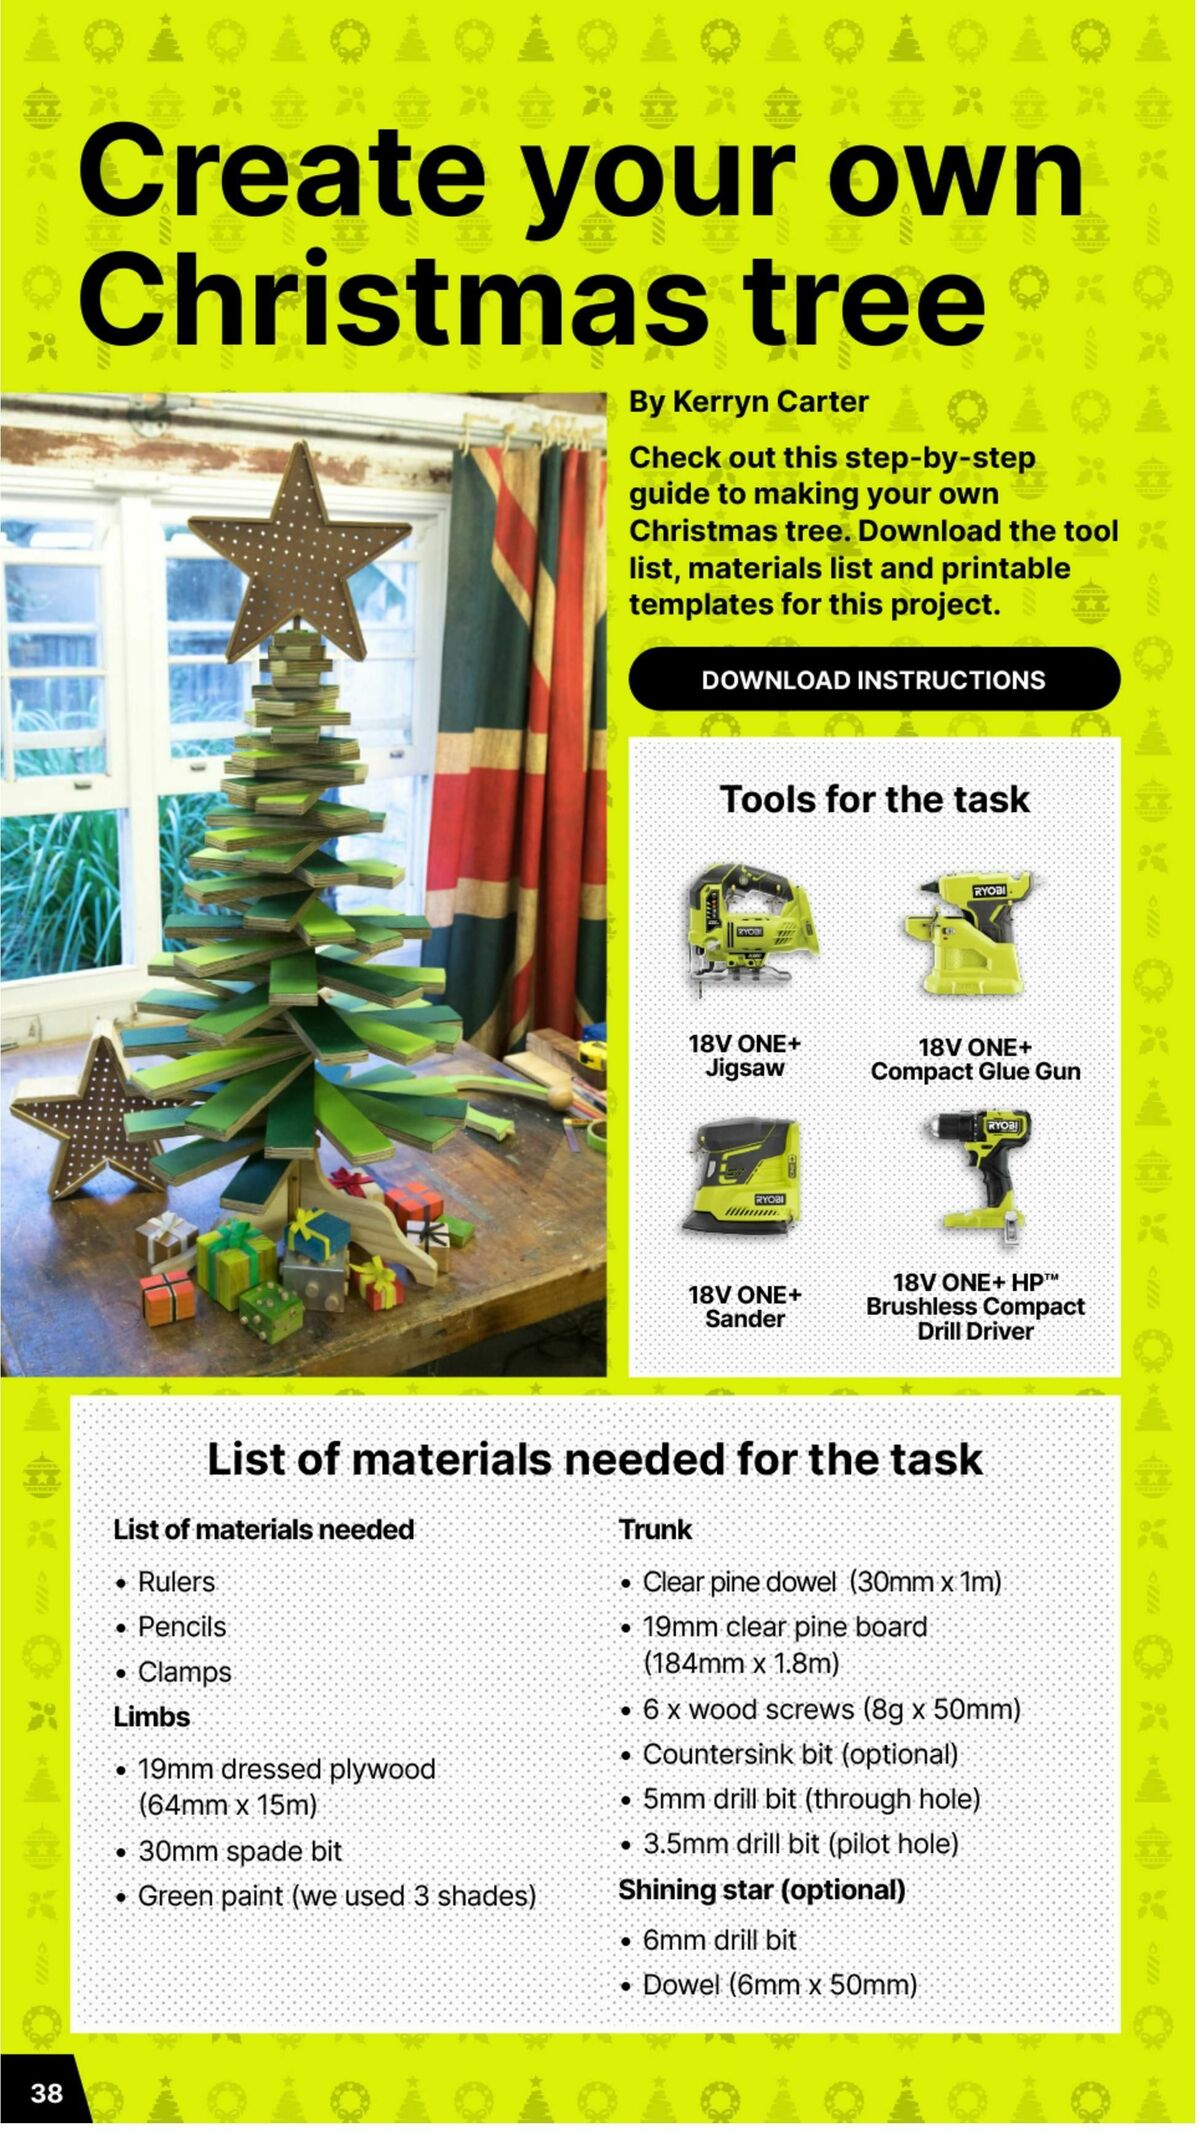 Bunnings Warehouse Christmas Made By Ryobi One+ Catalogues from 19 November